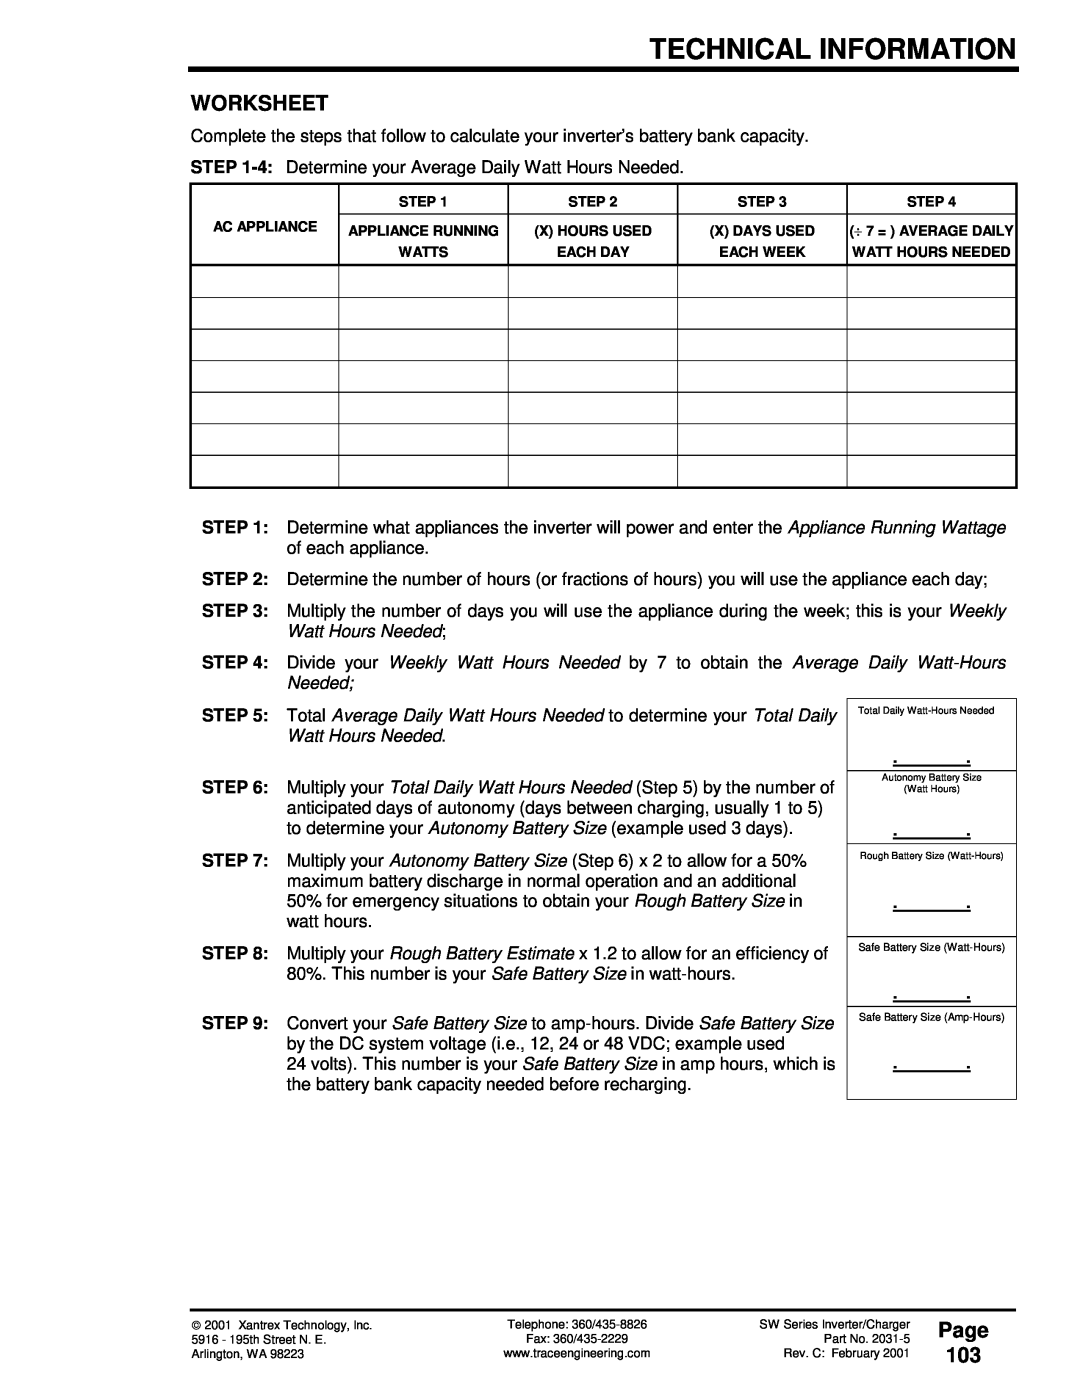 Xantrex Technology 120 VAC/60 owner manual Worksheet, Page 103, Technical Information, Watts 